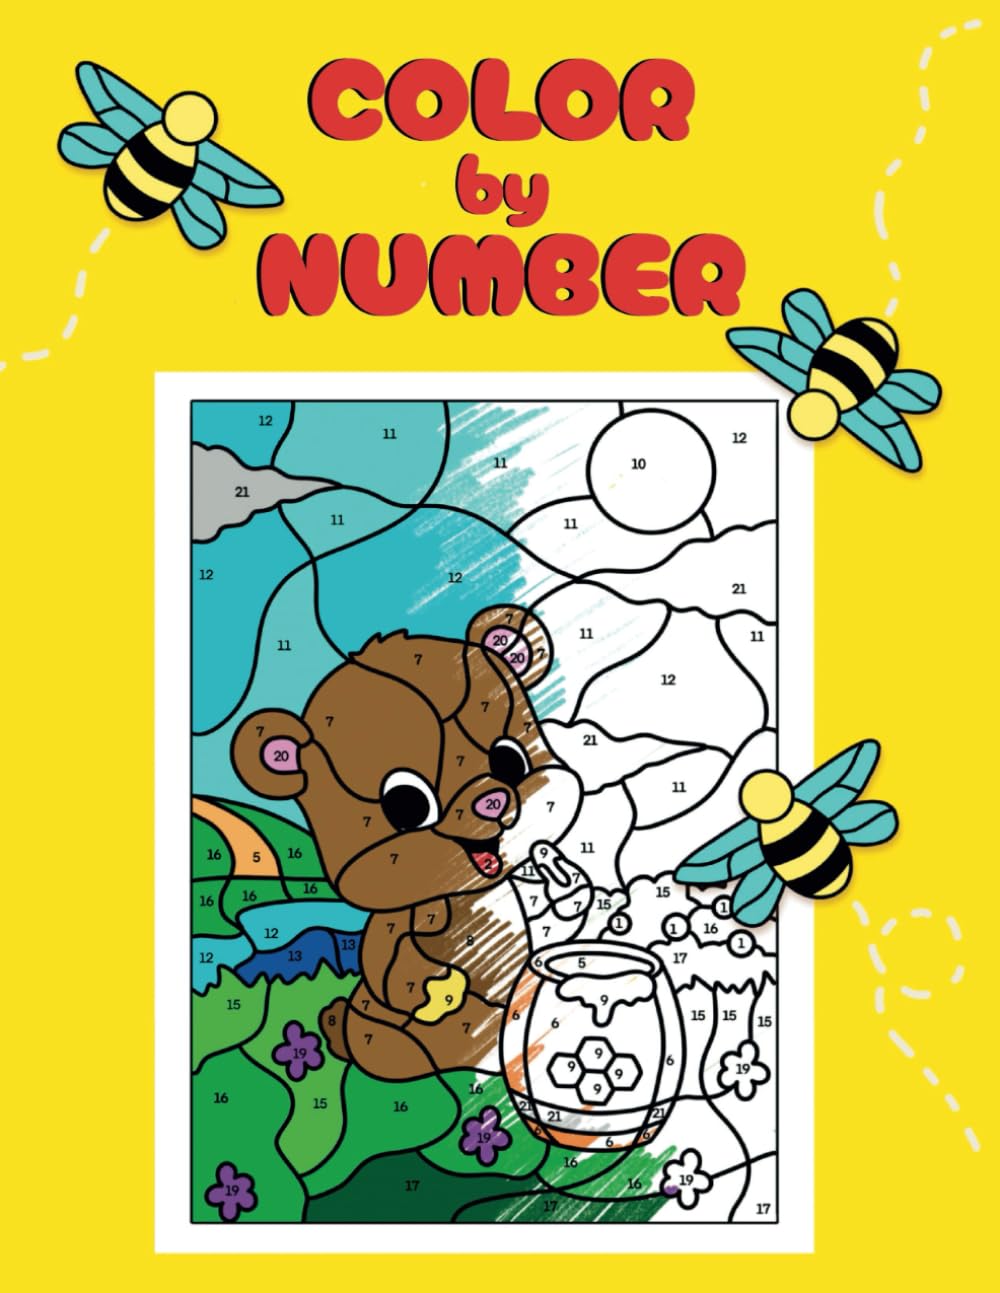 COLOR BY NUMBER activity book for kindergarten and school kids ages 4-8, wide variety of cute and adorable images: animals, birds, toys, vehicles, sea ... and more. (Coloring book for boys and girls)